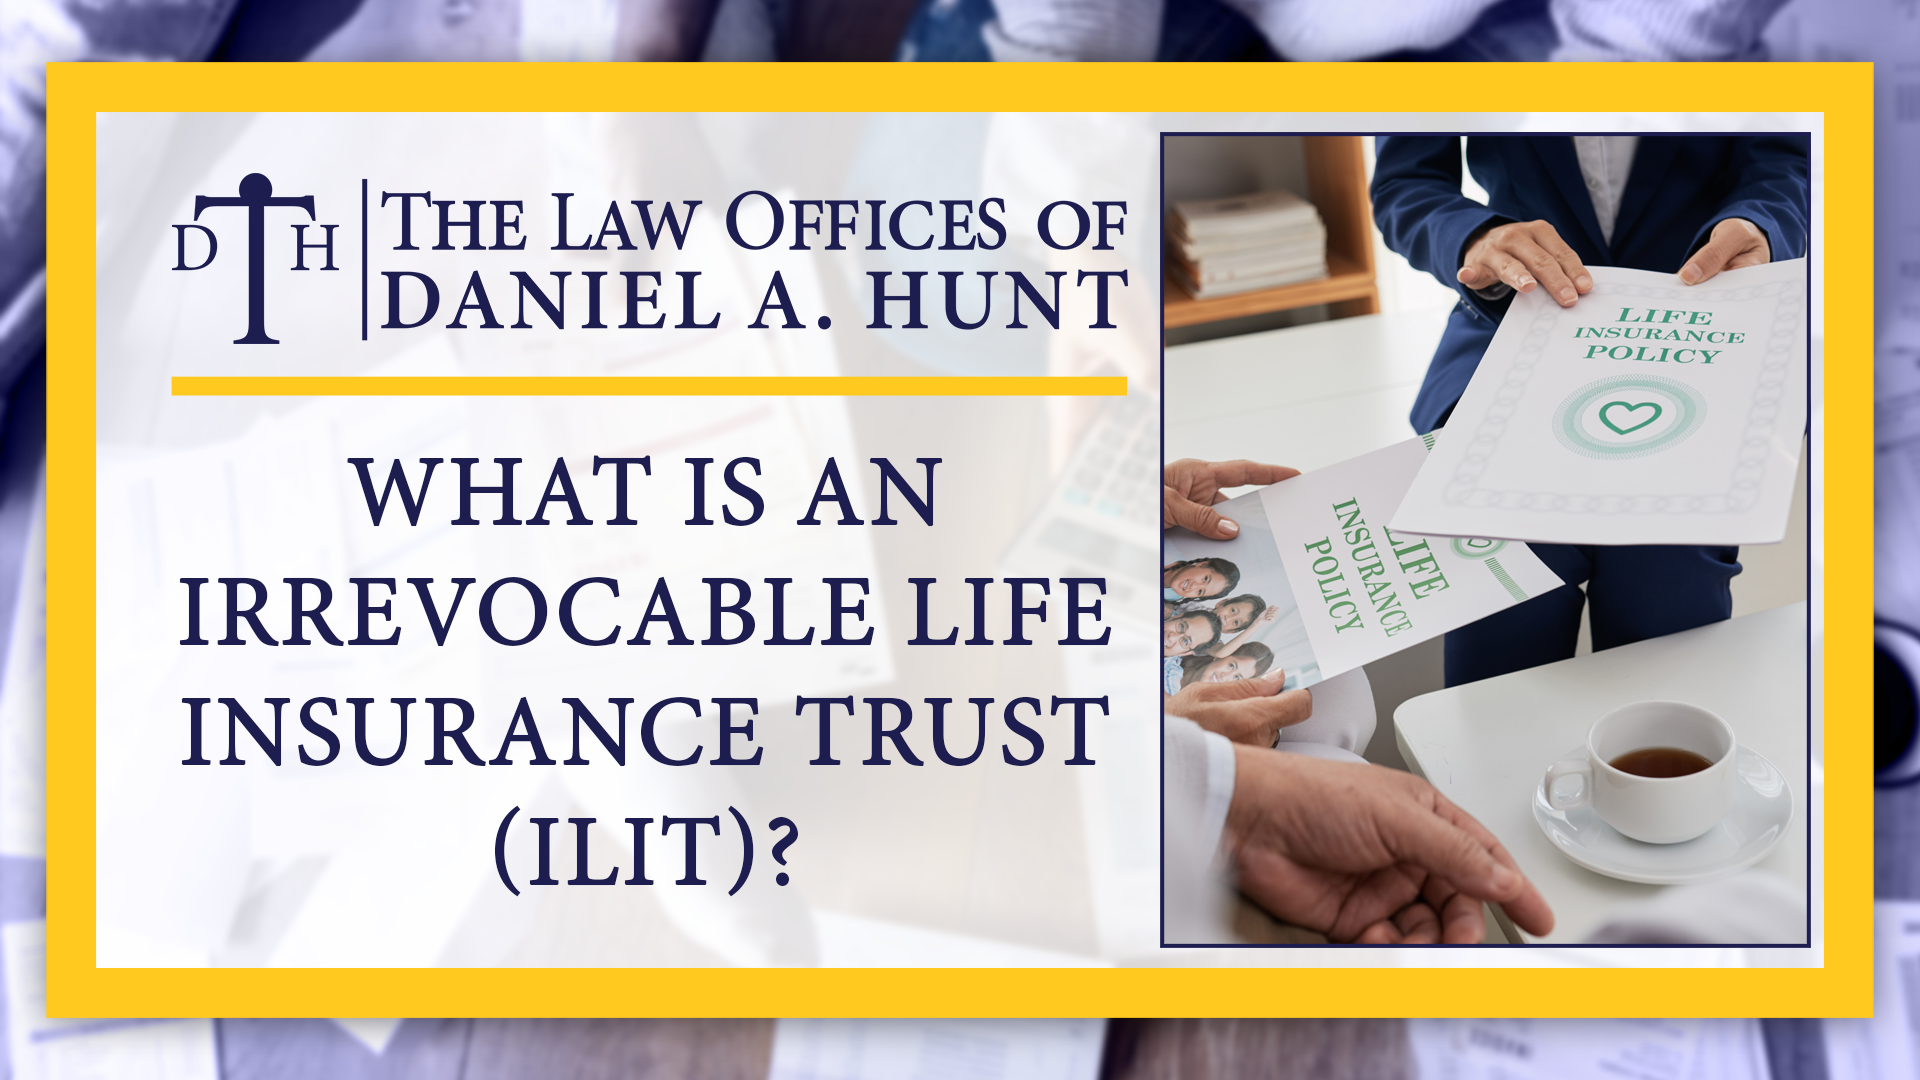 What is an irrevocable life insurance trust?